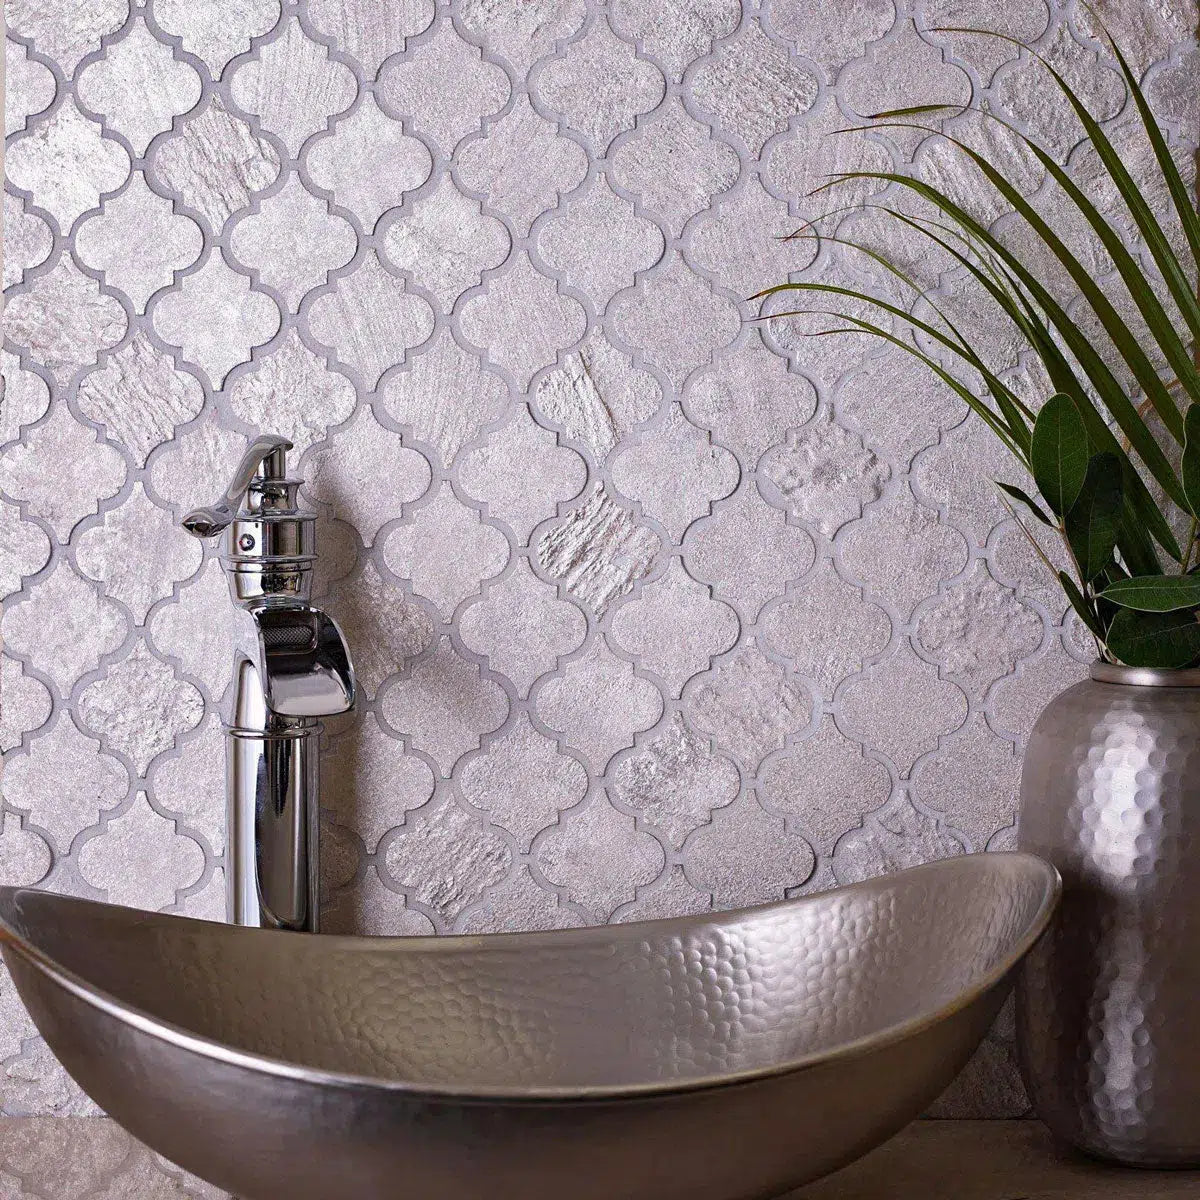 Silver Arabesque Mosaic Tile with Resin Details